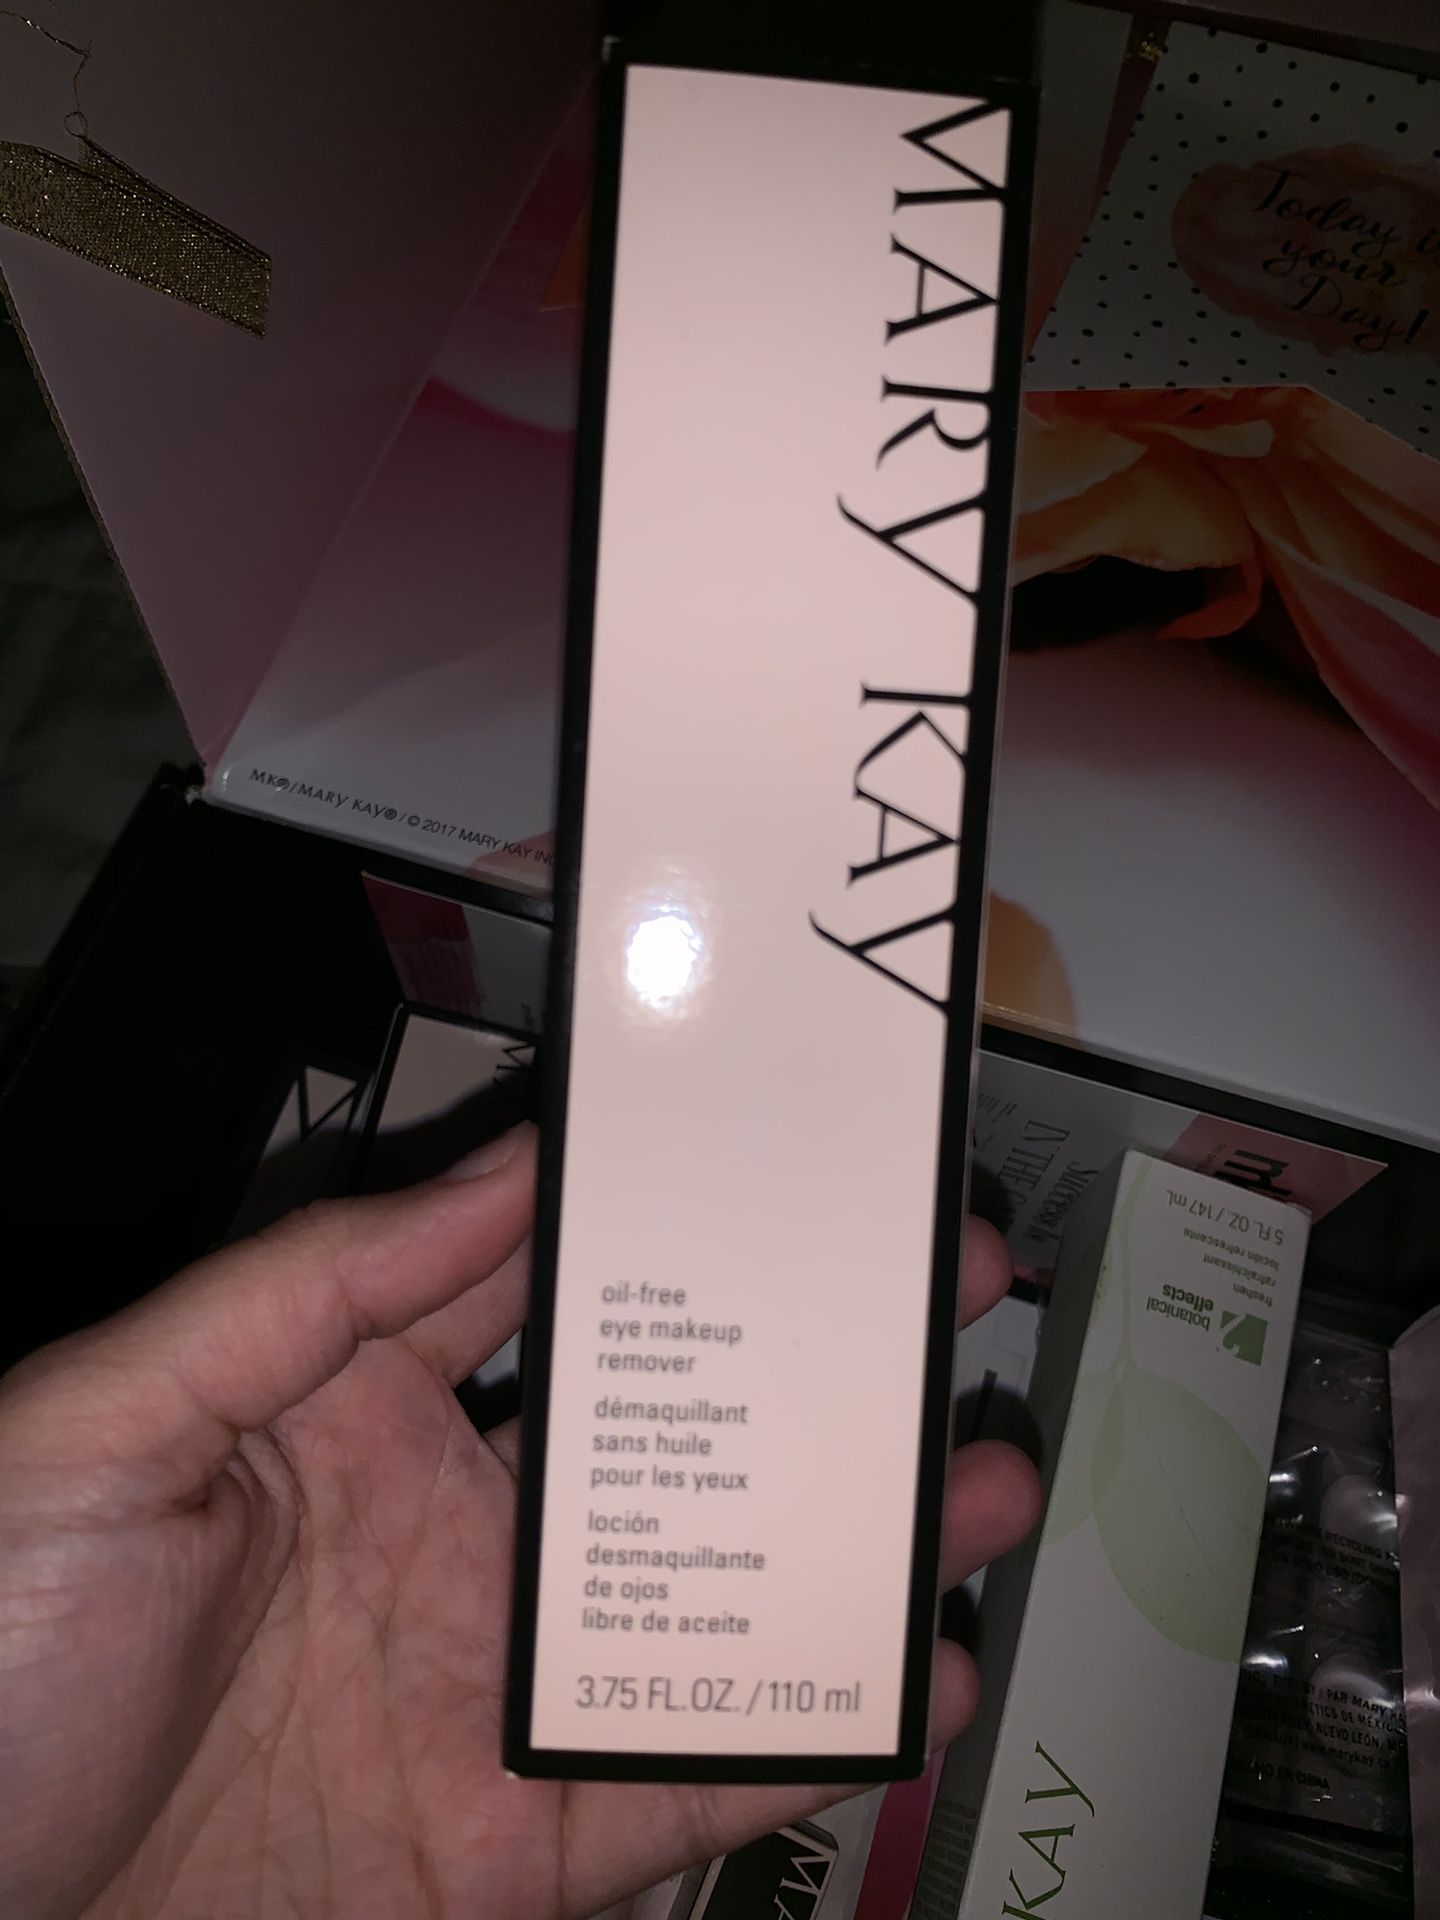 Mary Kay makeup remover